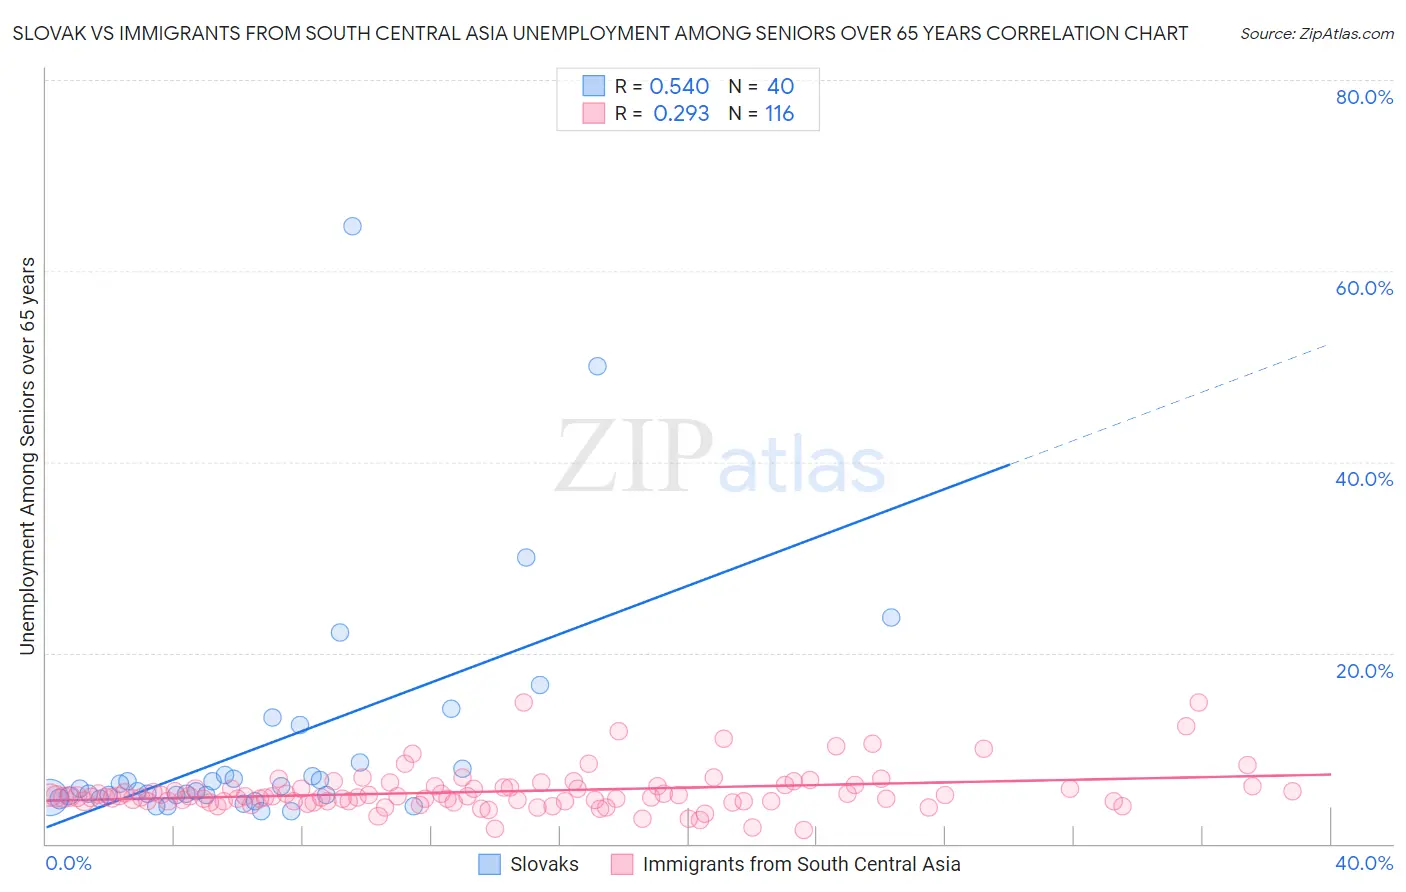 Slovak vs Immigrants from South Central Asia Unemployment Among Seniors over 65 years